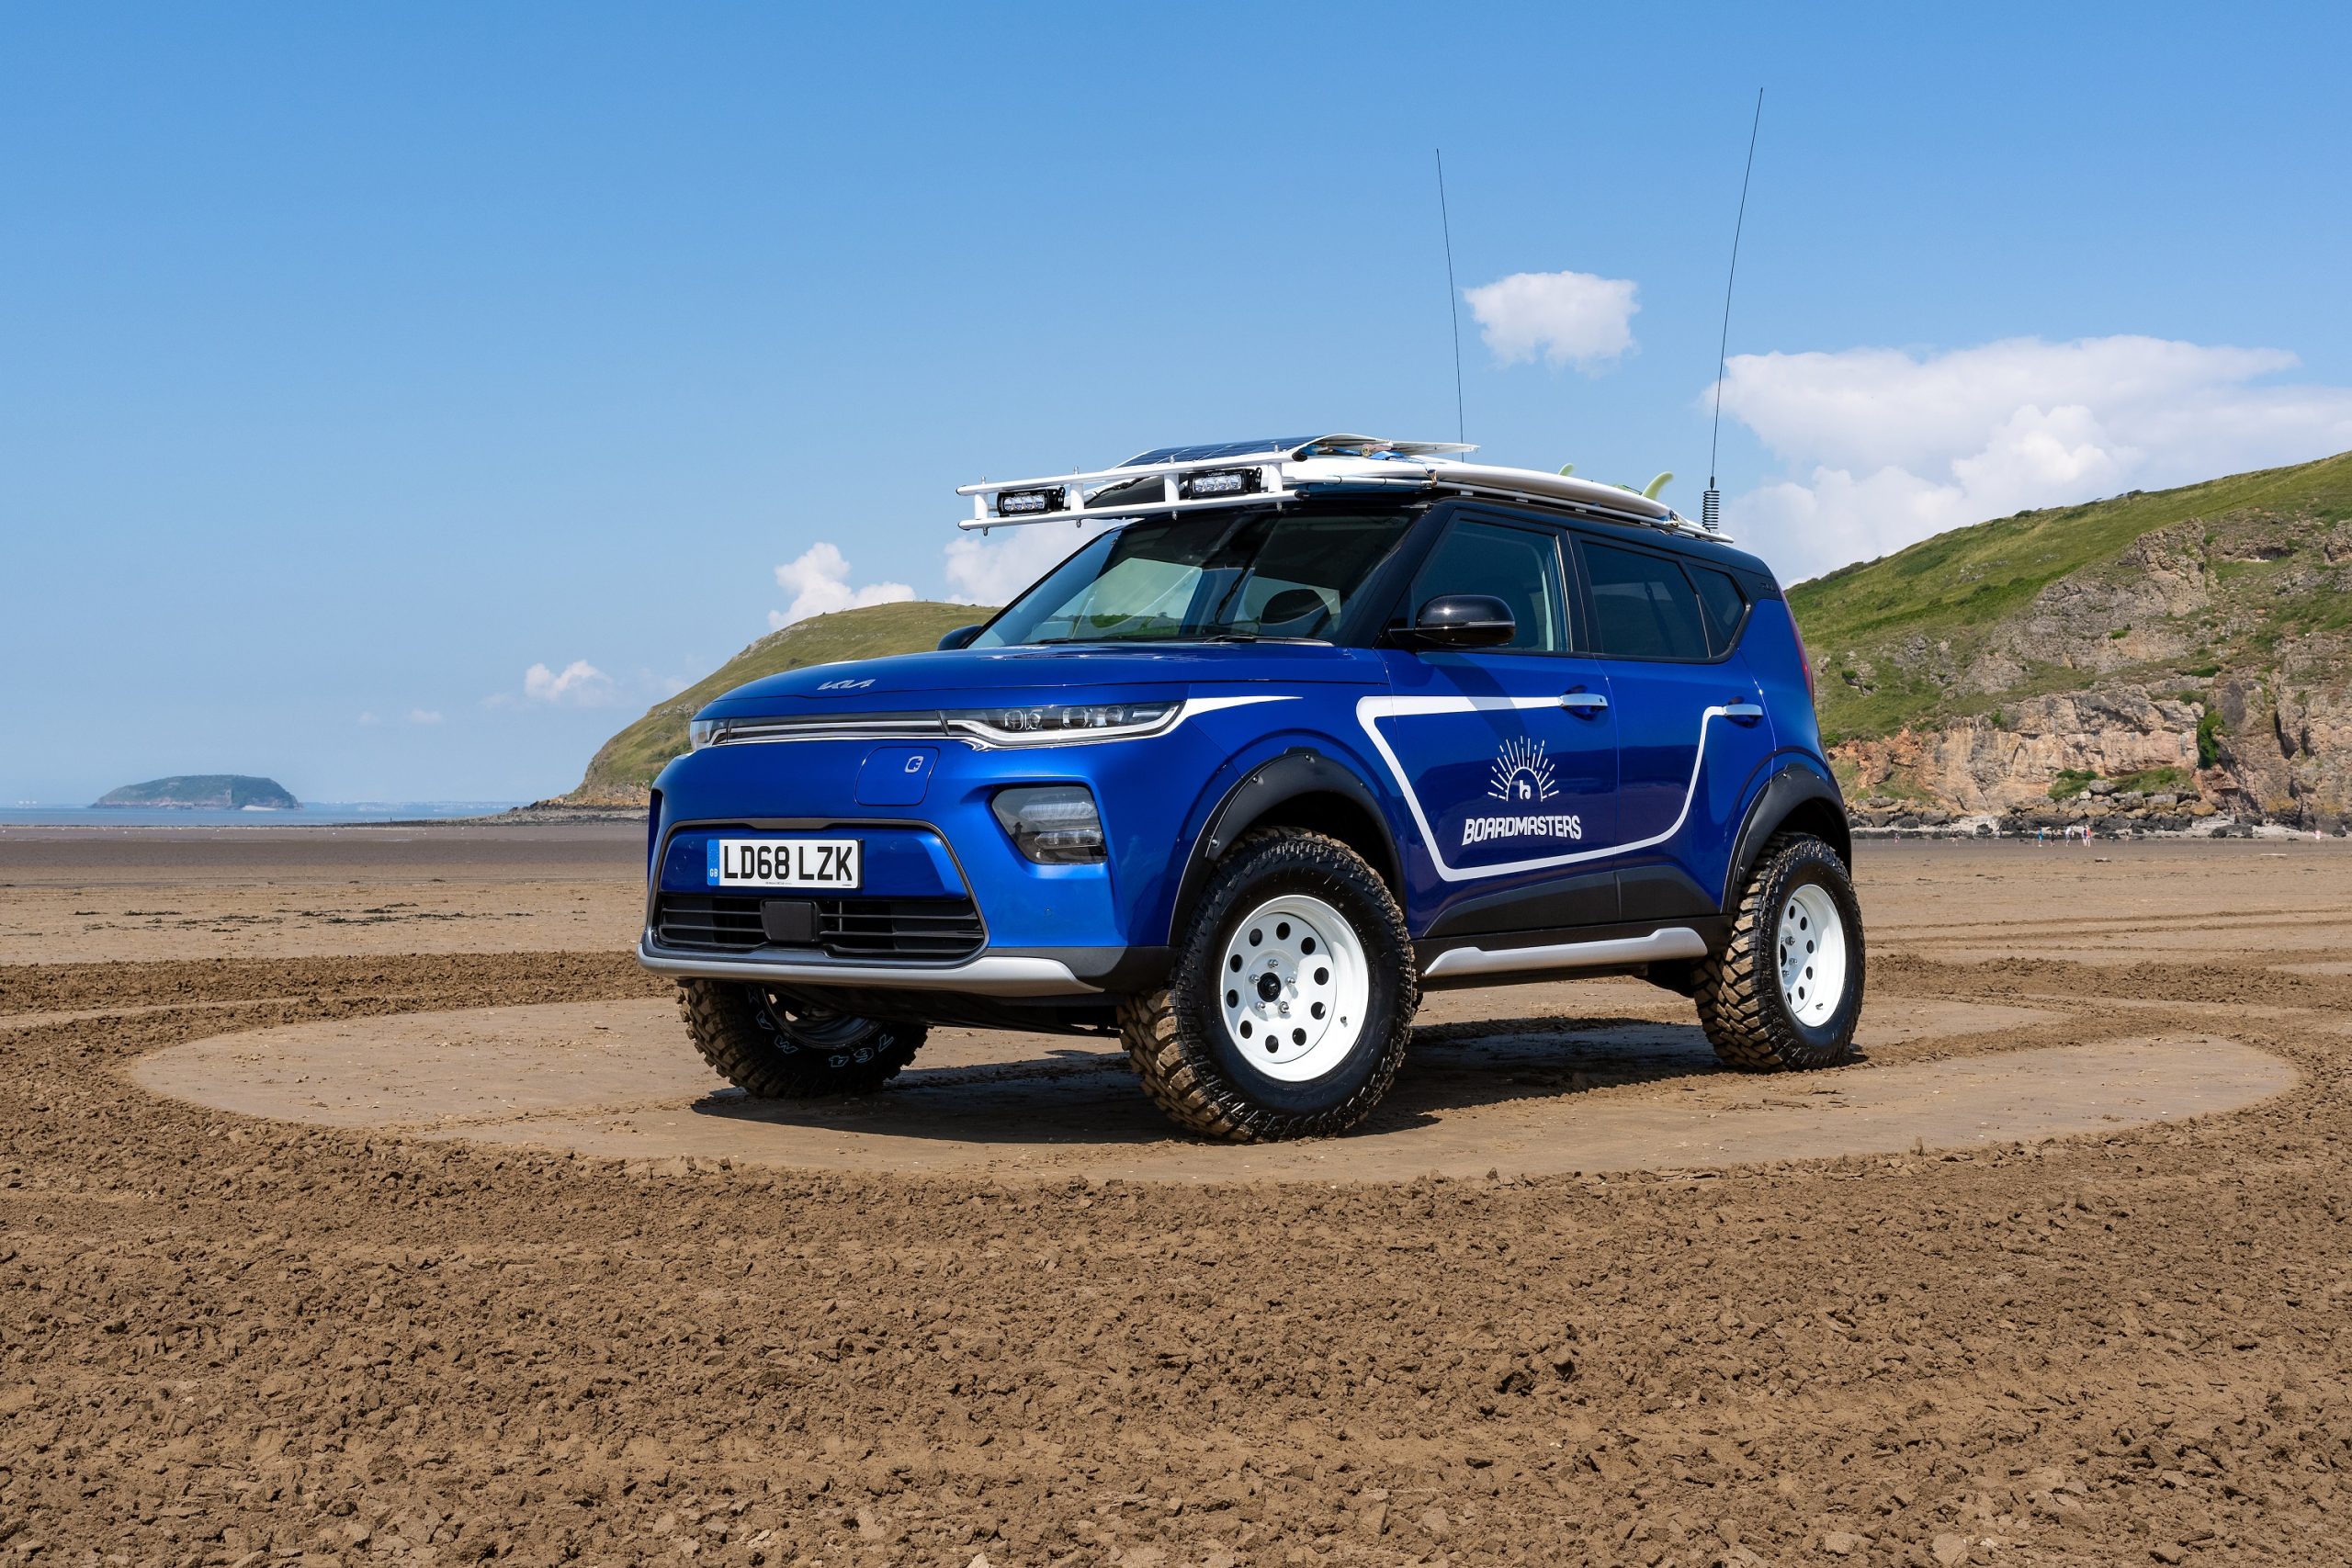 The lifted, blue Kia Beach EV with surfboards mounted on the roof